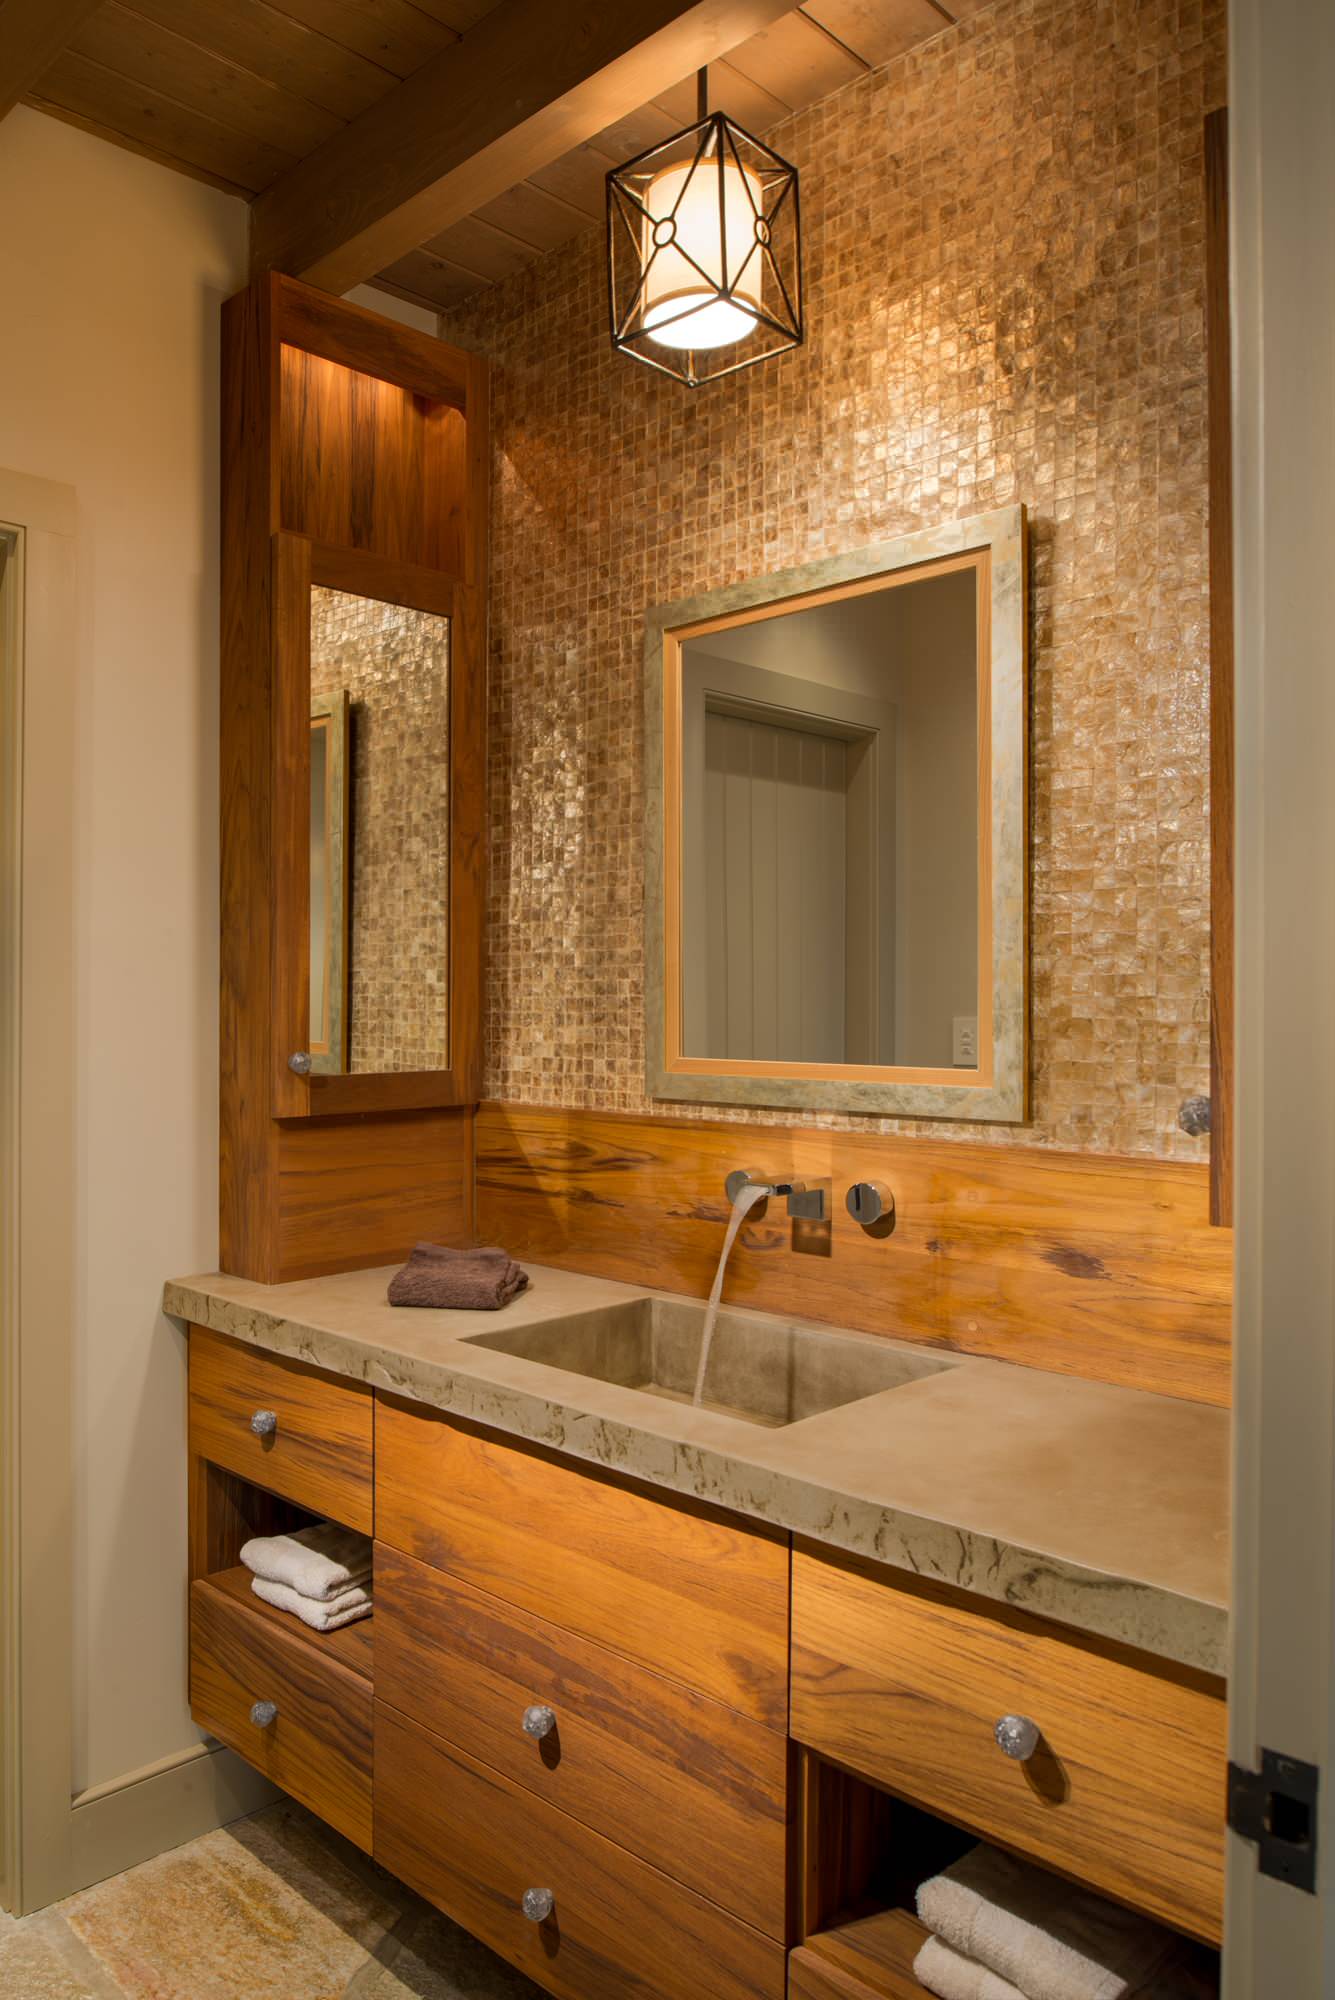 Bathroom Interior With Small Bathroom Interior Design Decorated With Minimalist Bathroom Vanity Made From Wooden Material And Small Bathroom Pendant Lighting Bathroom Bathroom Pendant Lighting Fixtures With A Controllable Light Intensity With Your Shades